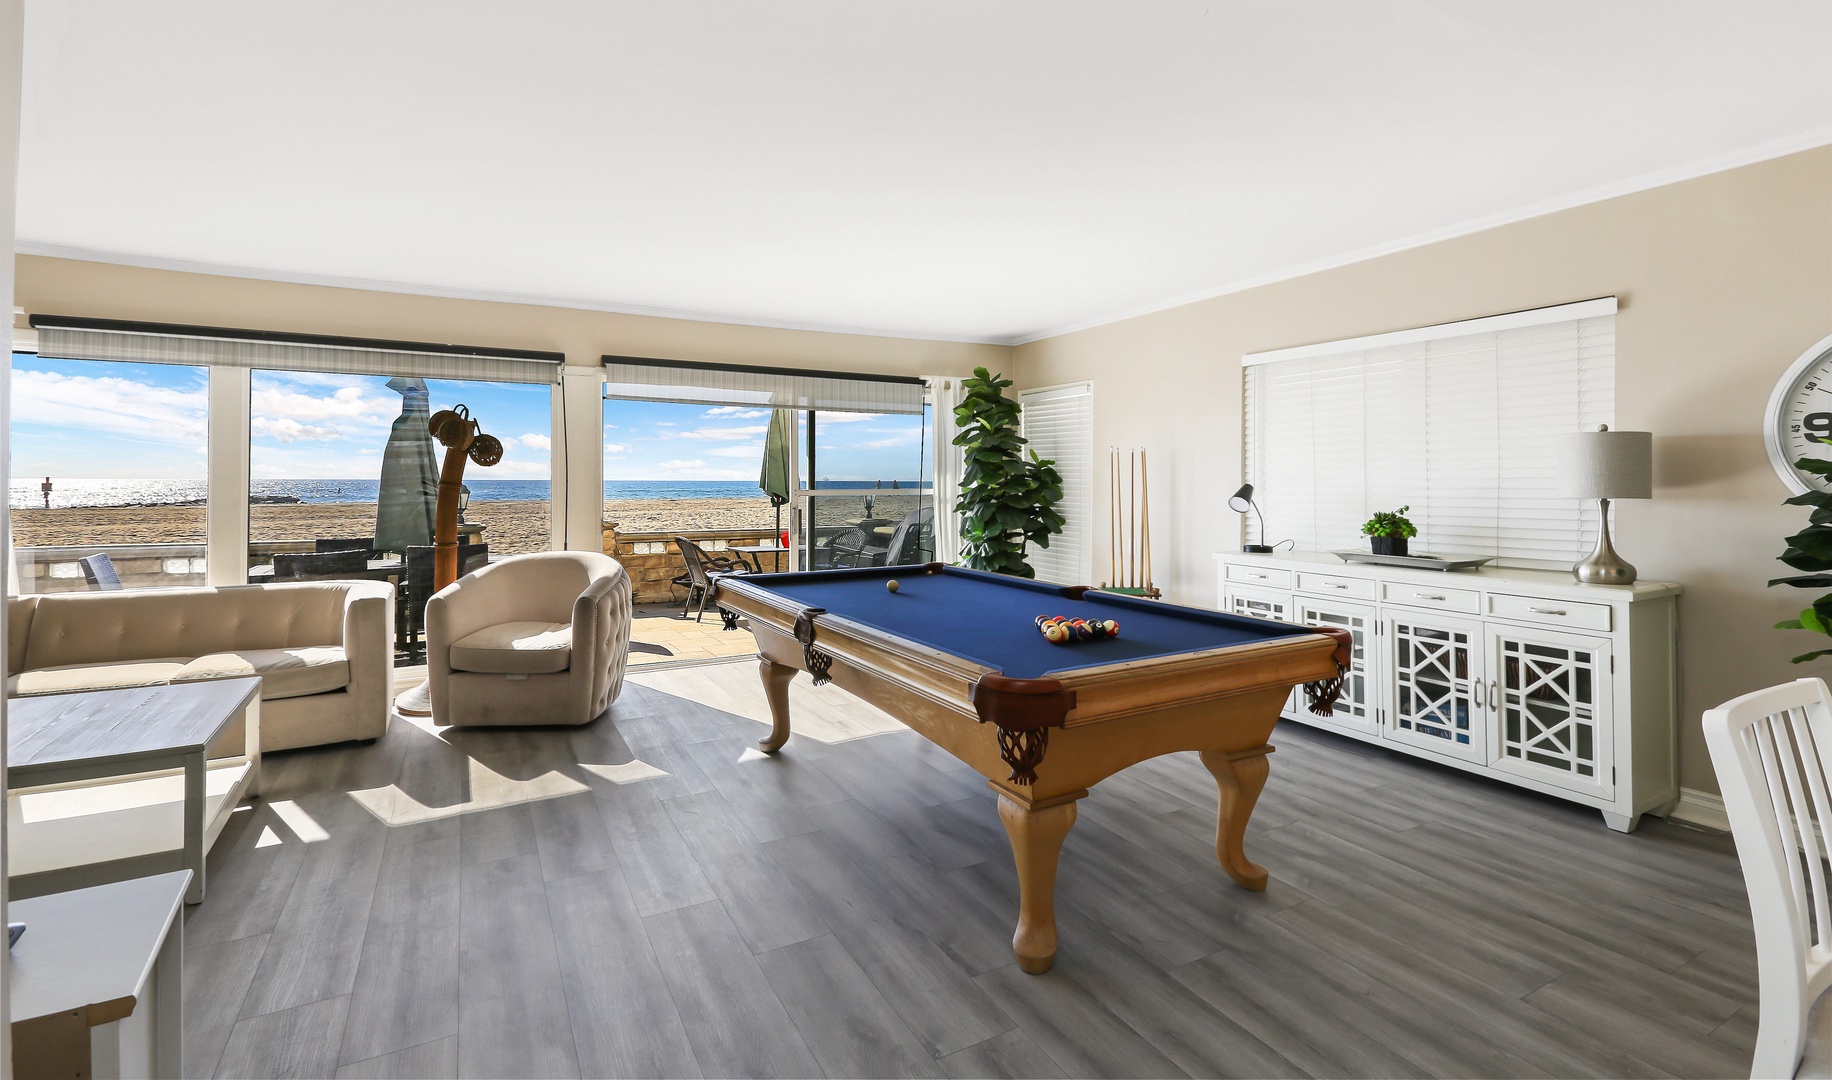 Living room with pool table, beach view, flat screen TV